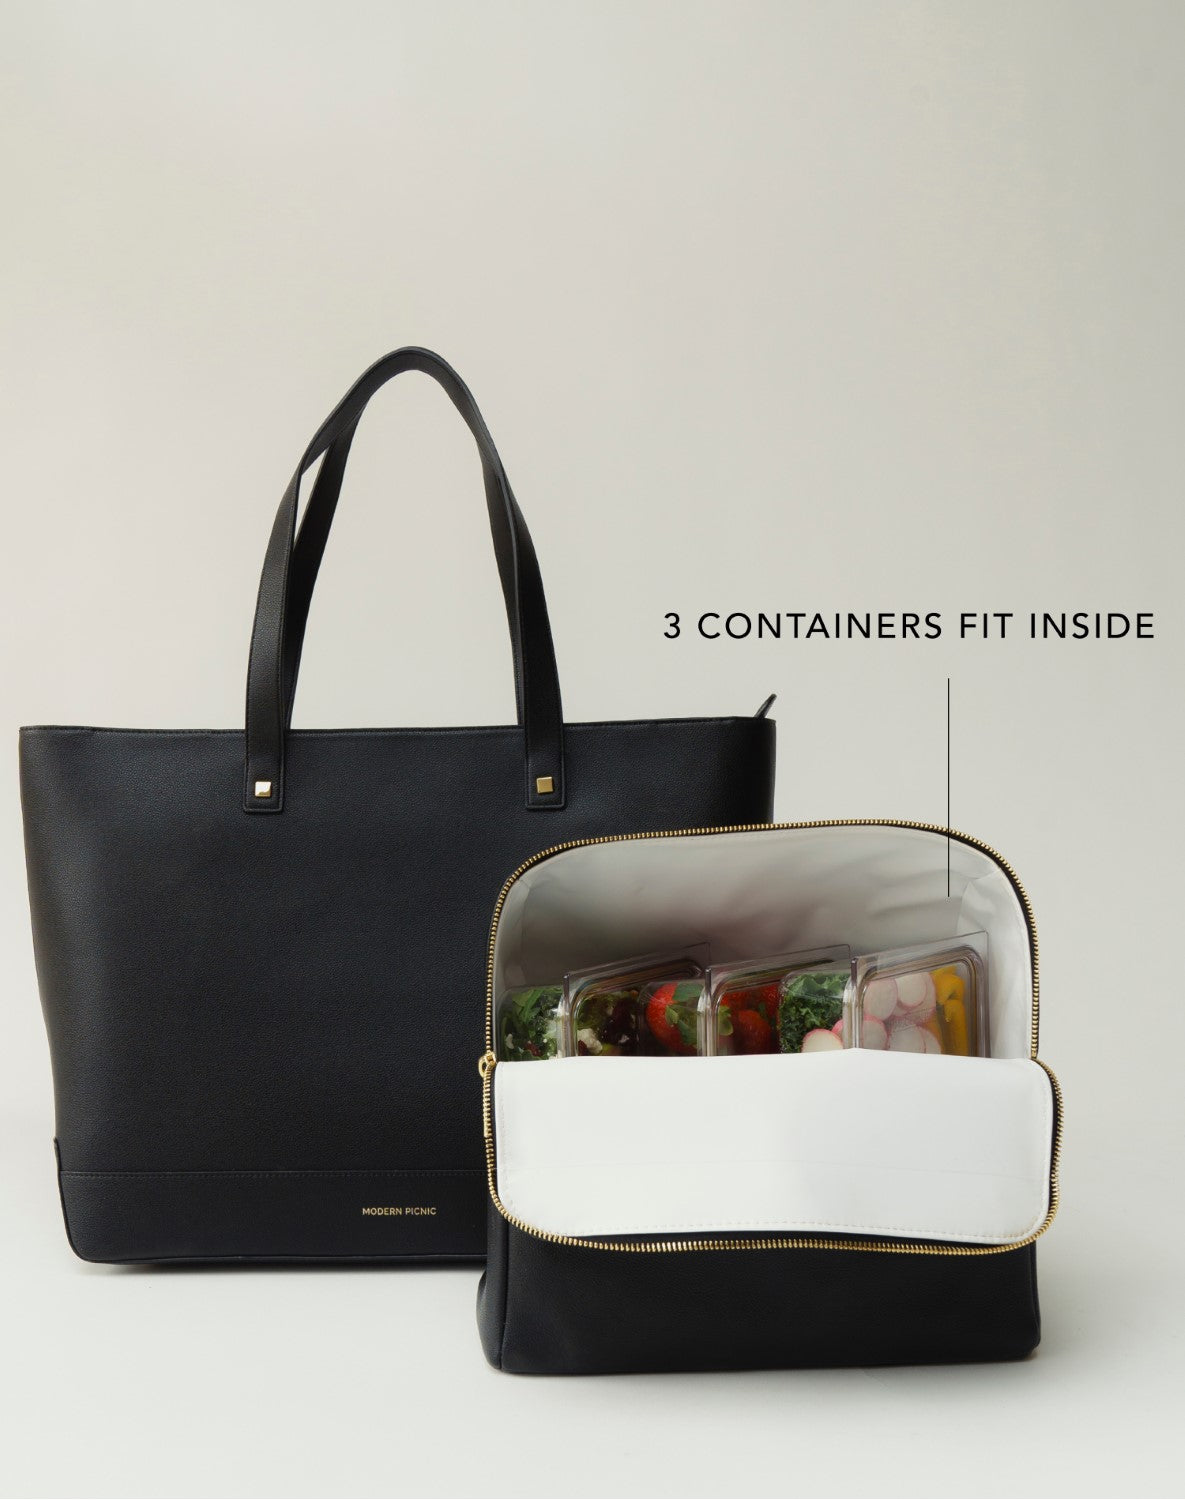 TOTE + 3 CONTAINER SET